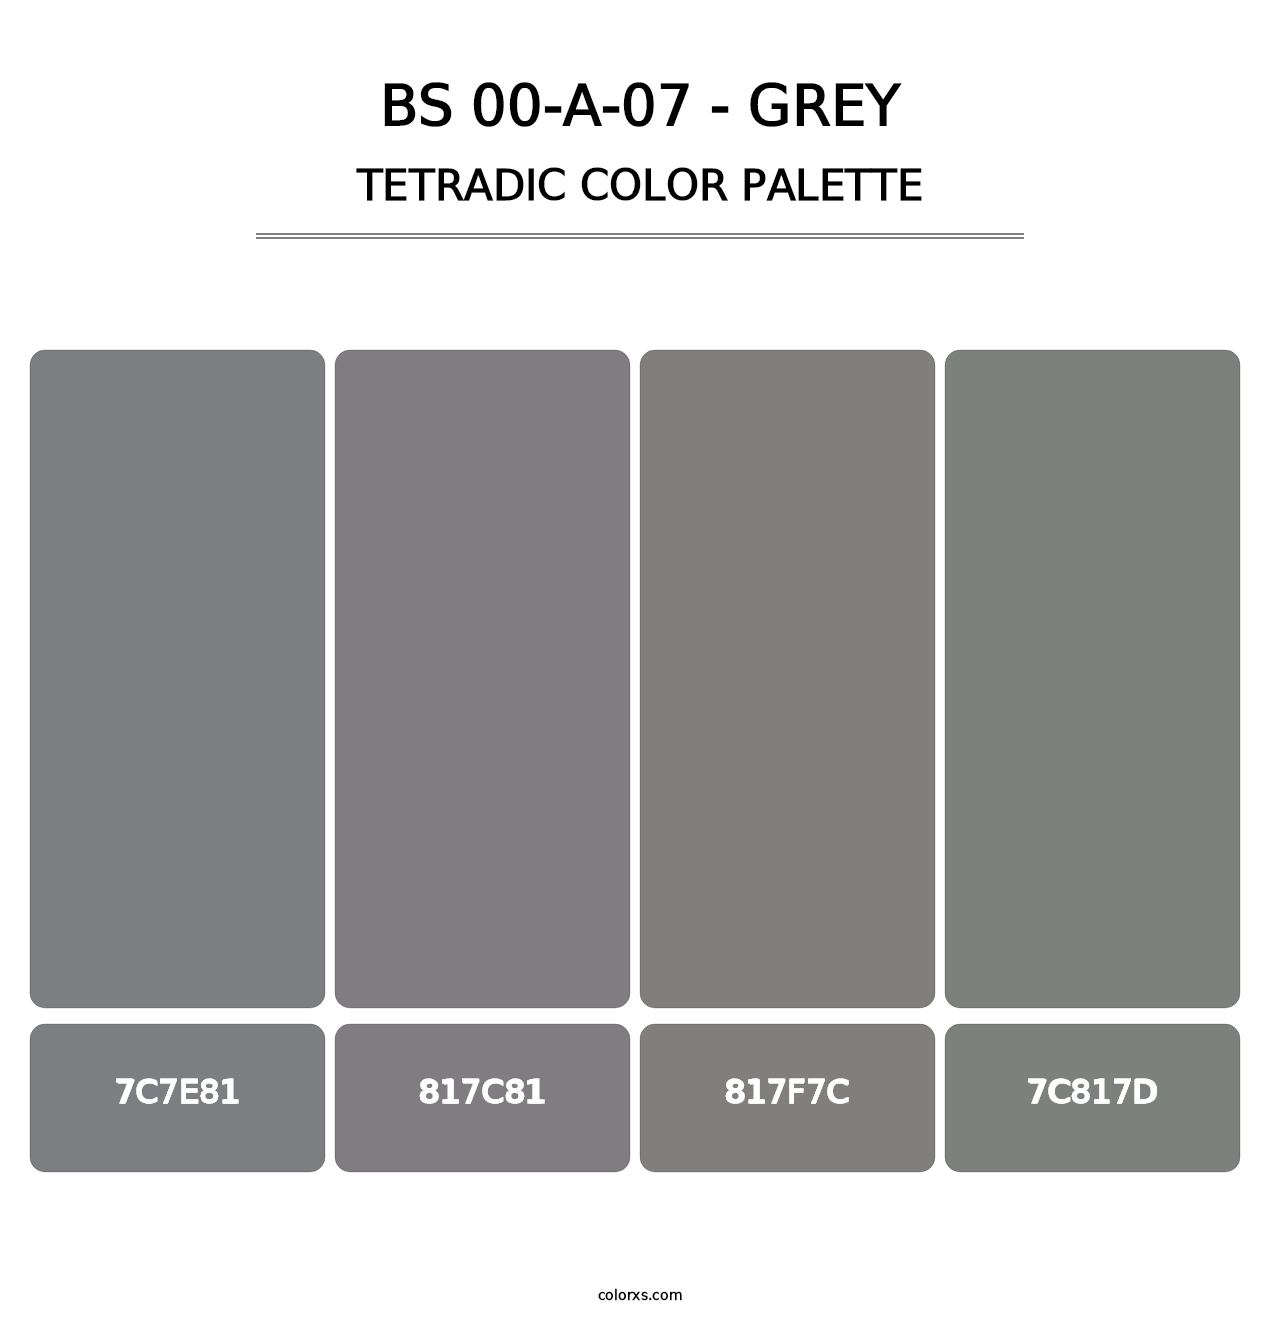 BS 00-A-07 - Grey - Tetradic Color Palette